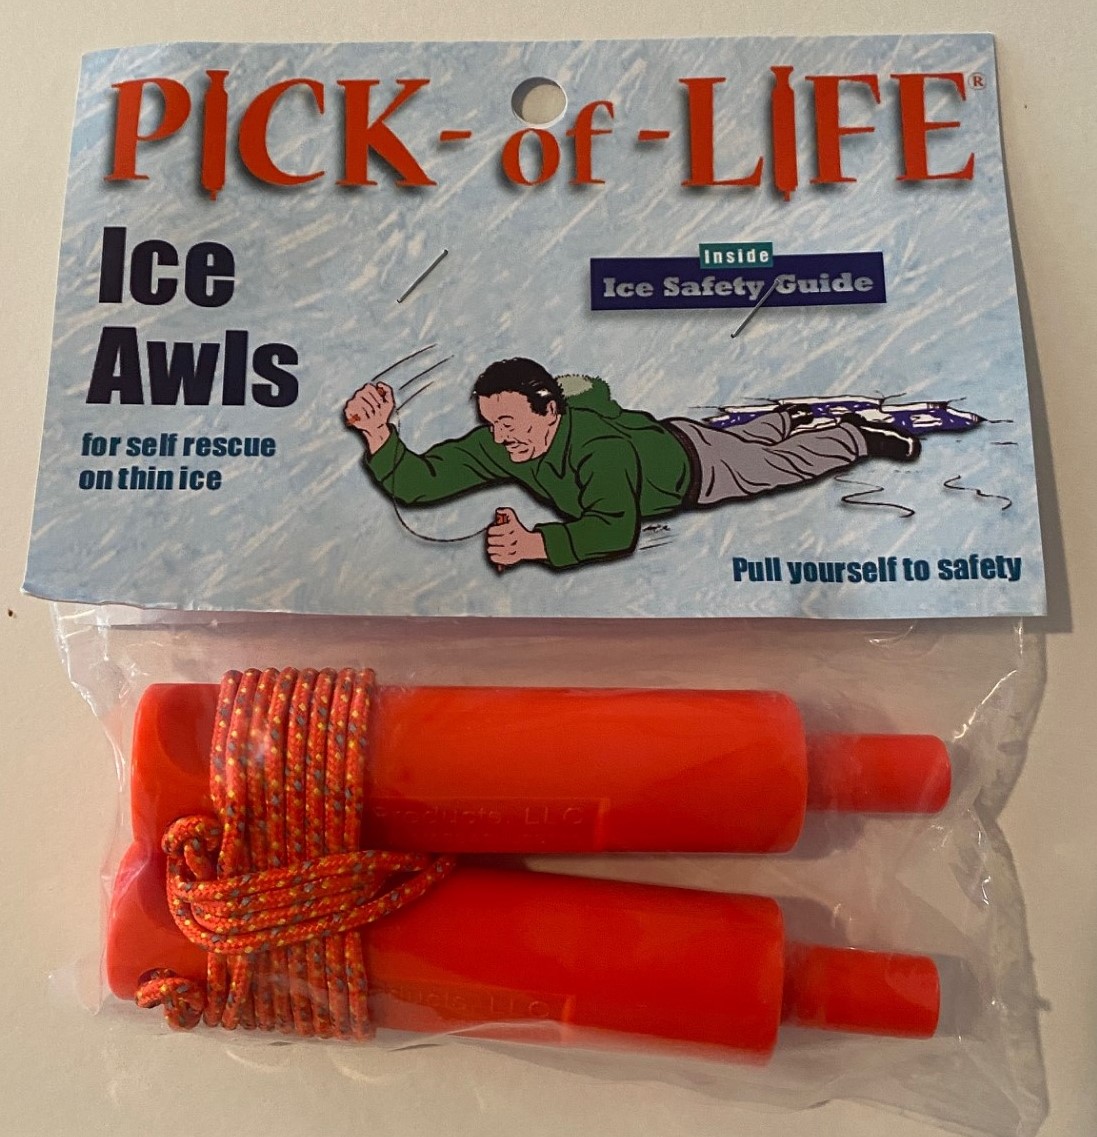 The Pick of Life Ice Awls